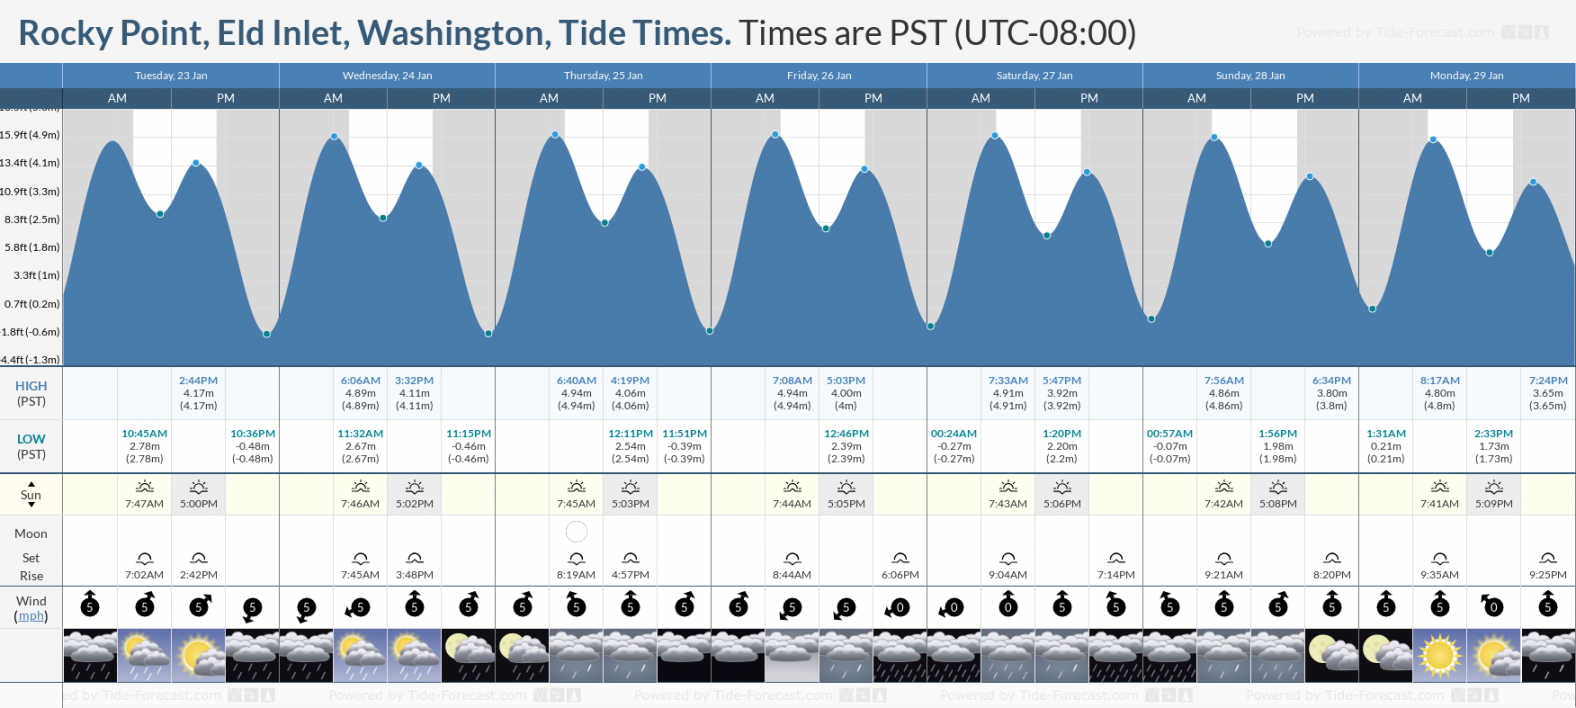 Tide Times and Tide Chart for Rocky Point, Eld Inlet